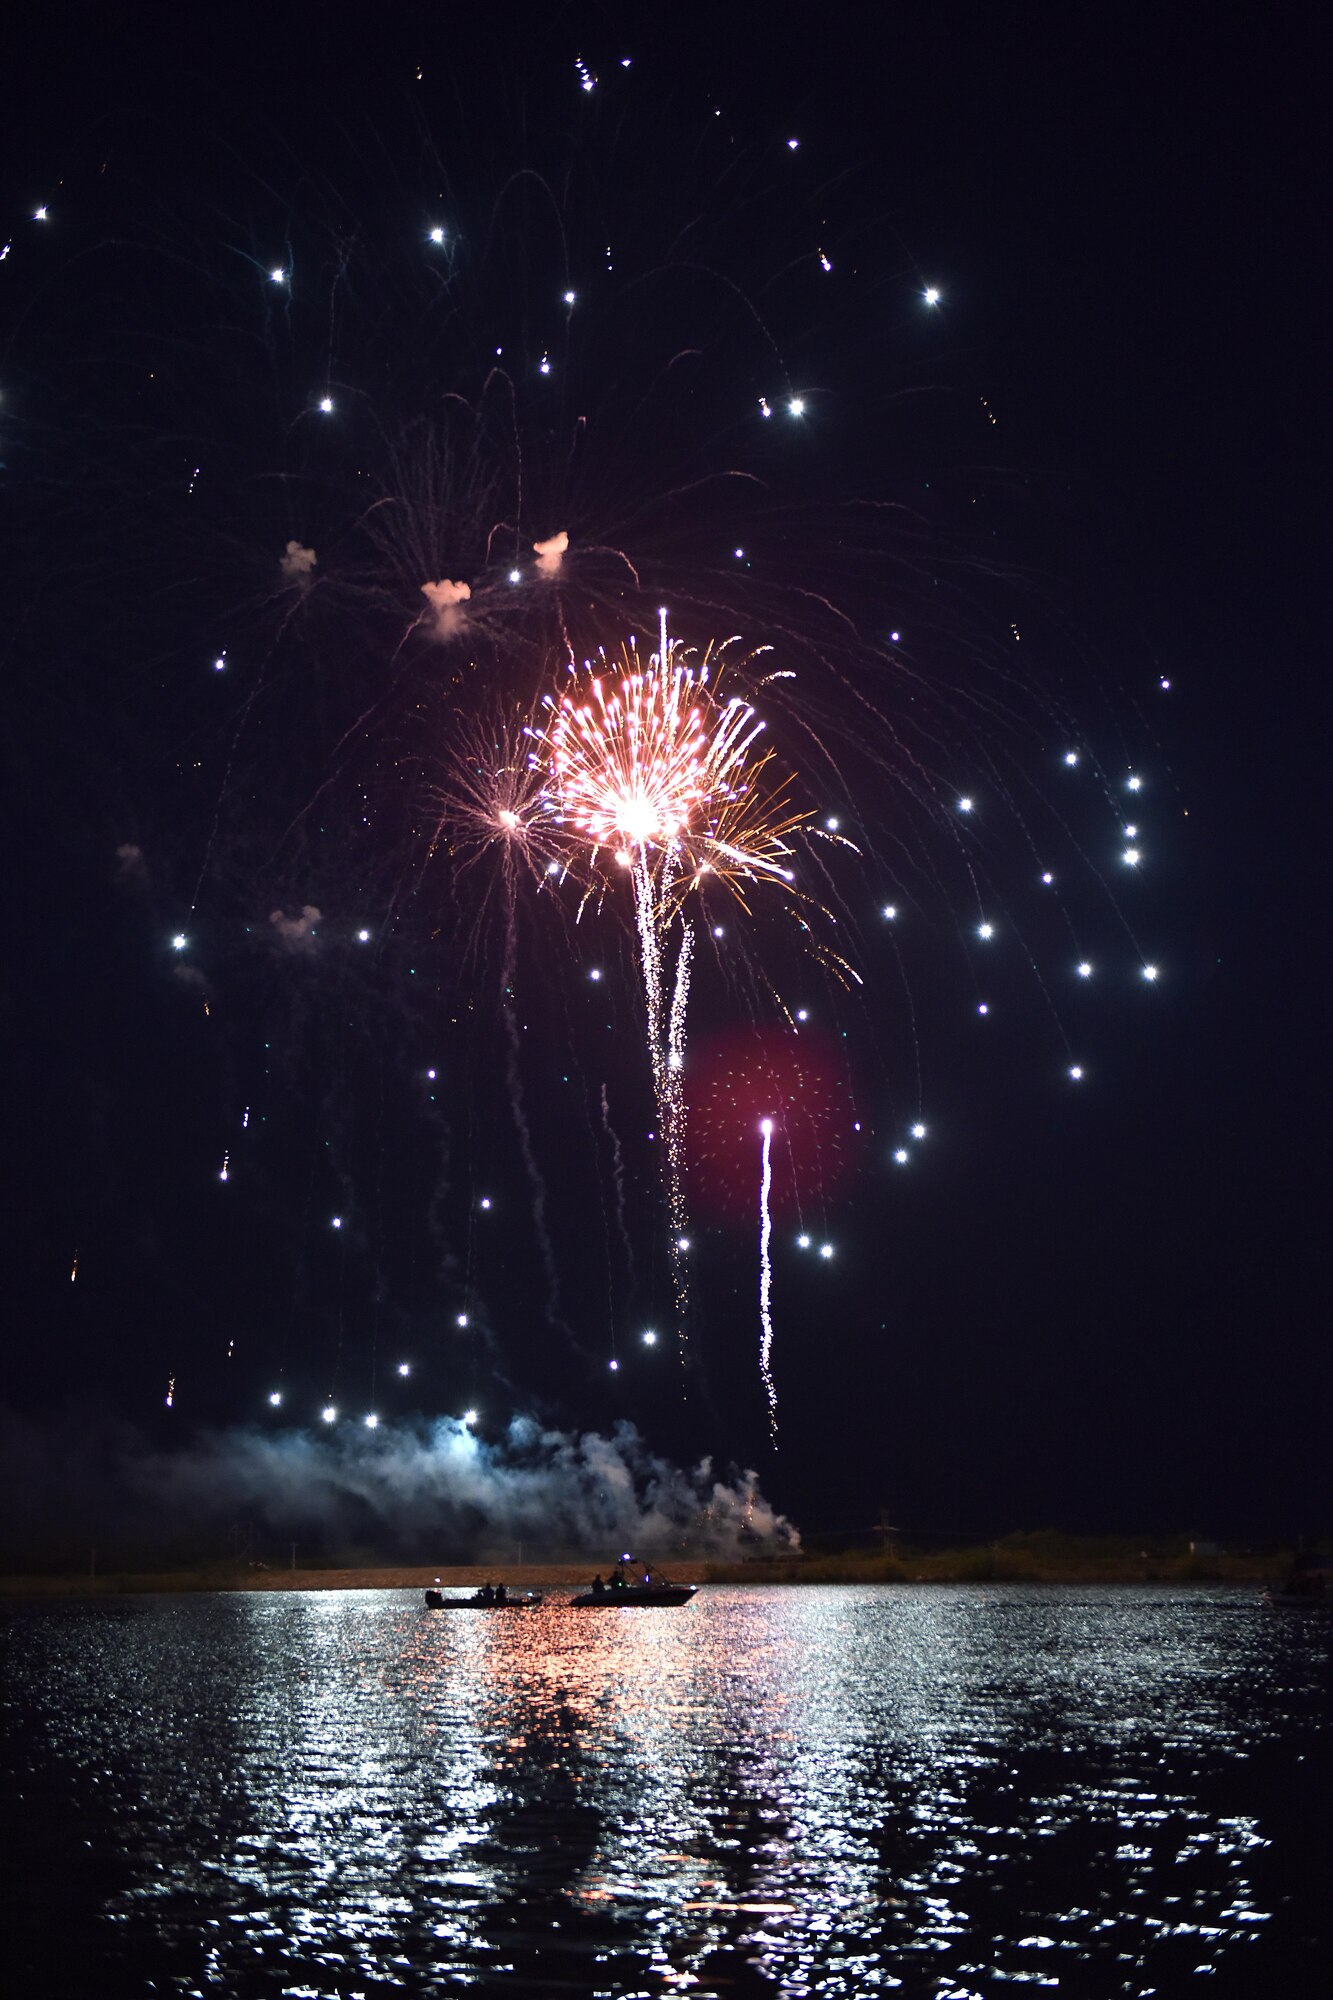 Fireworks explode over boats on Lake Nasworthy during the 4th of July Celebration in San Angelo, Texas, July 4, 2016. Participants could rent boats or sit alongside the bank of Lake Nasworthy to view the fireworks display. (U.S. Air Force photo by Airman 1st Class Caelynn Ferguson/Released)